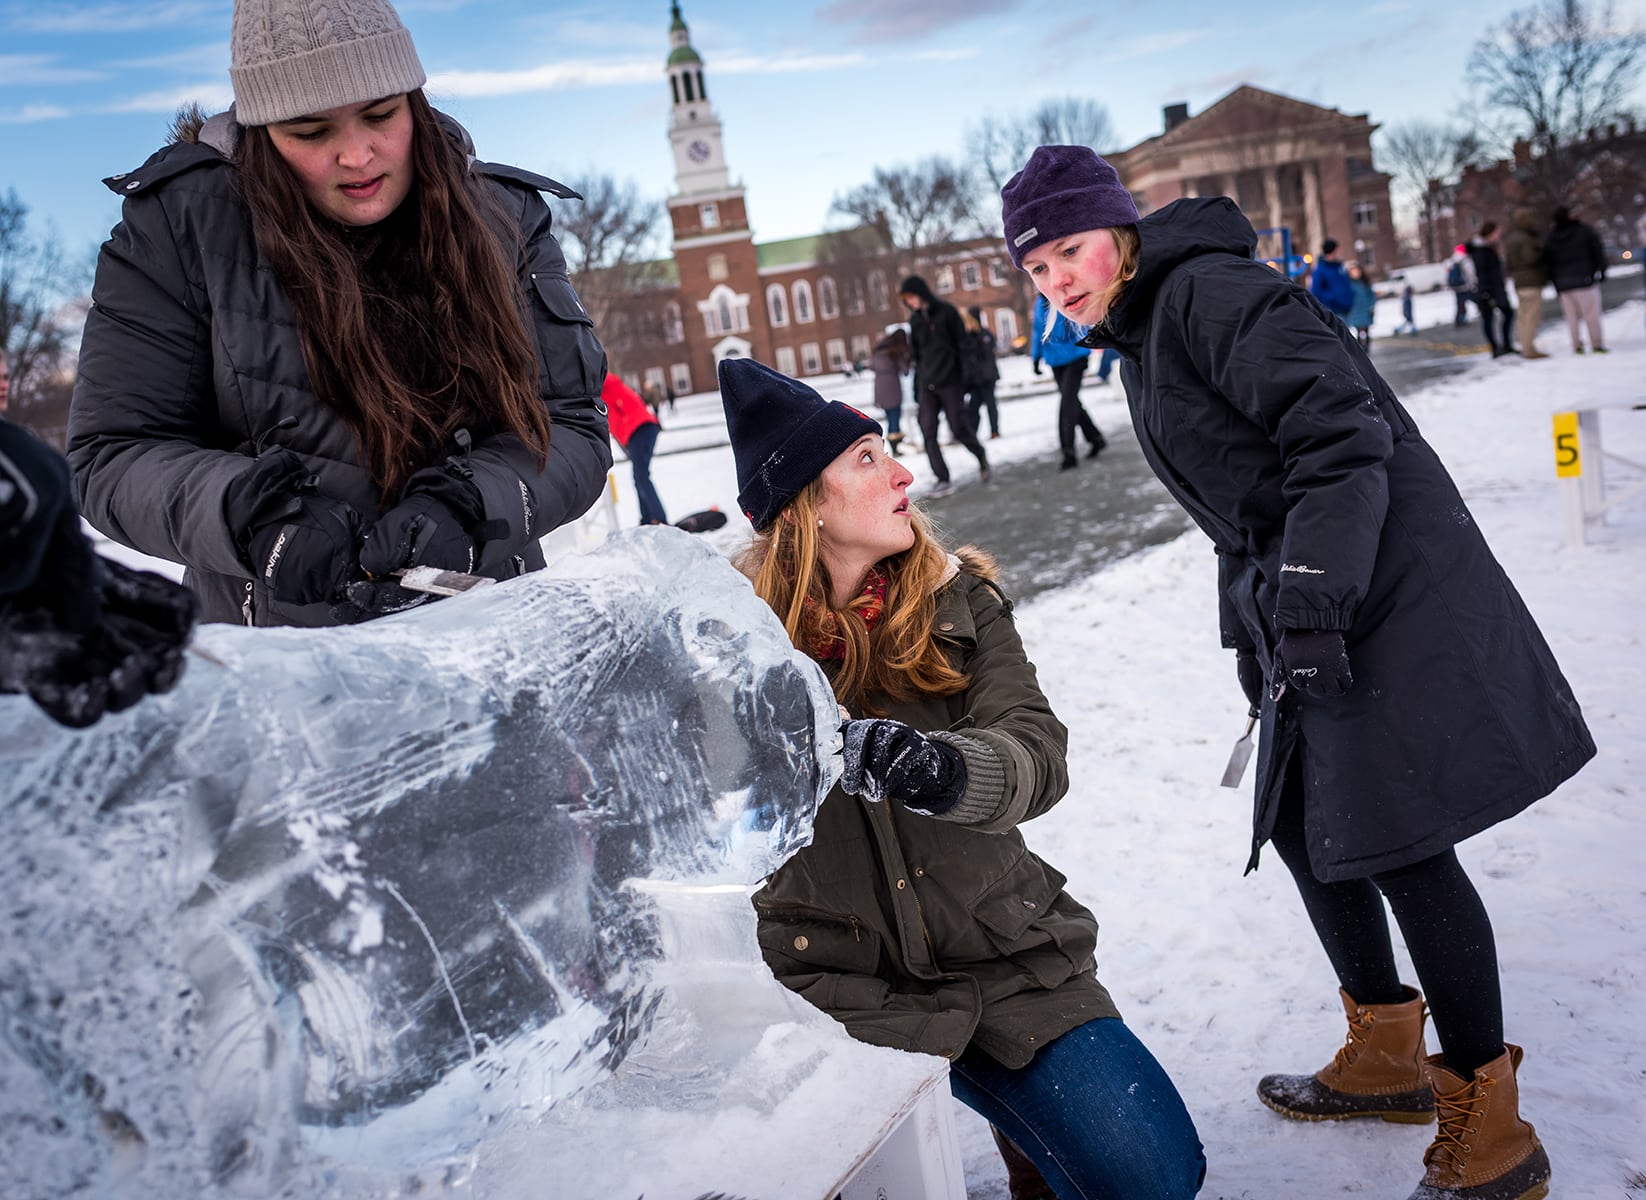 Dartmouth College Winter Carnival Ice Sculpture Contest. Katherine Flessel of Hillsborough, CA., Hayley Nichols of Ketchikan, AK. & Alison Clarke of Westchester, NY work on their entry.